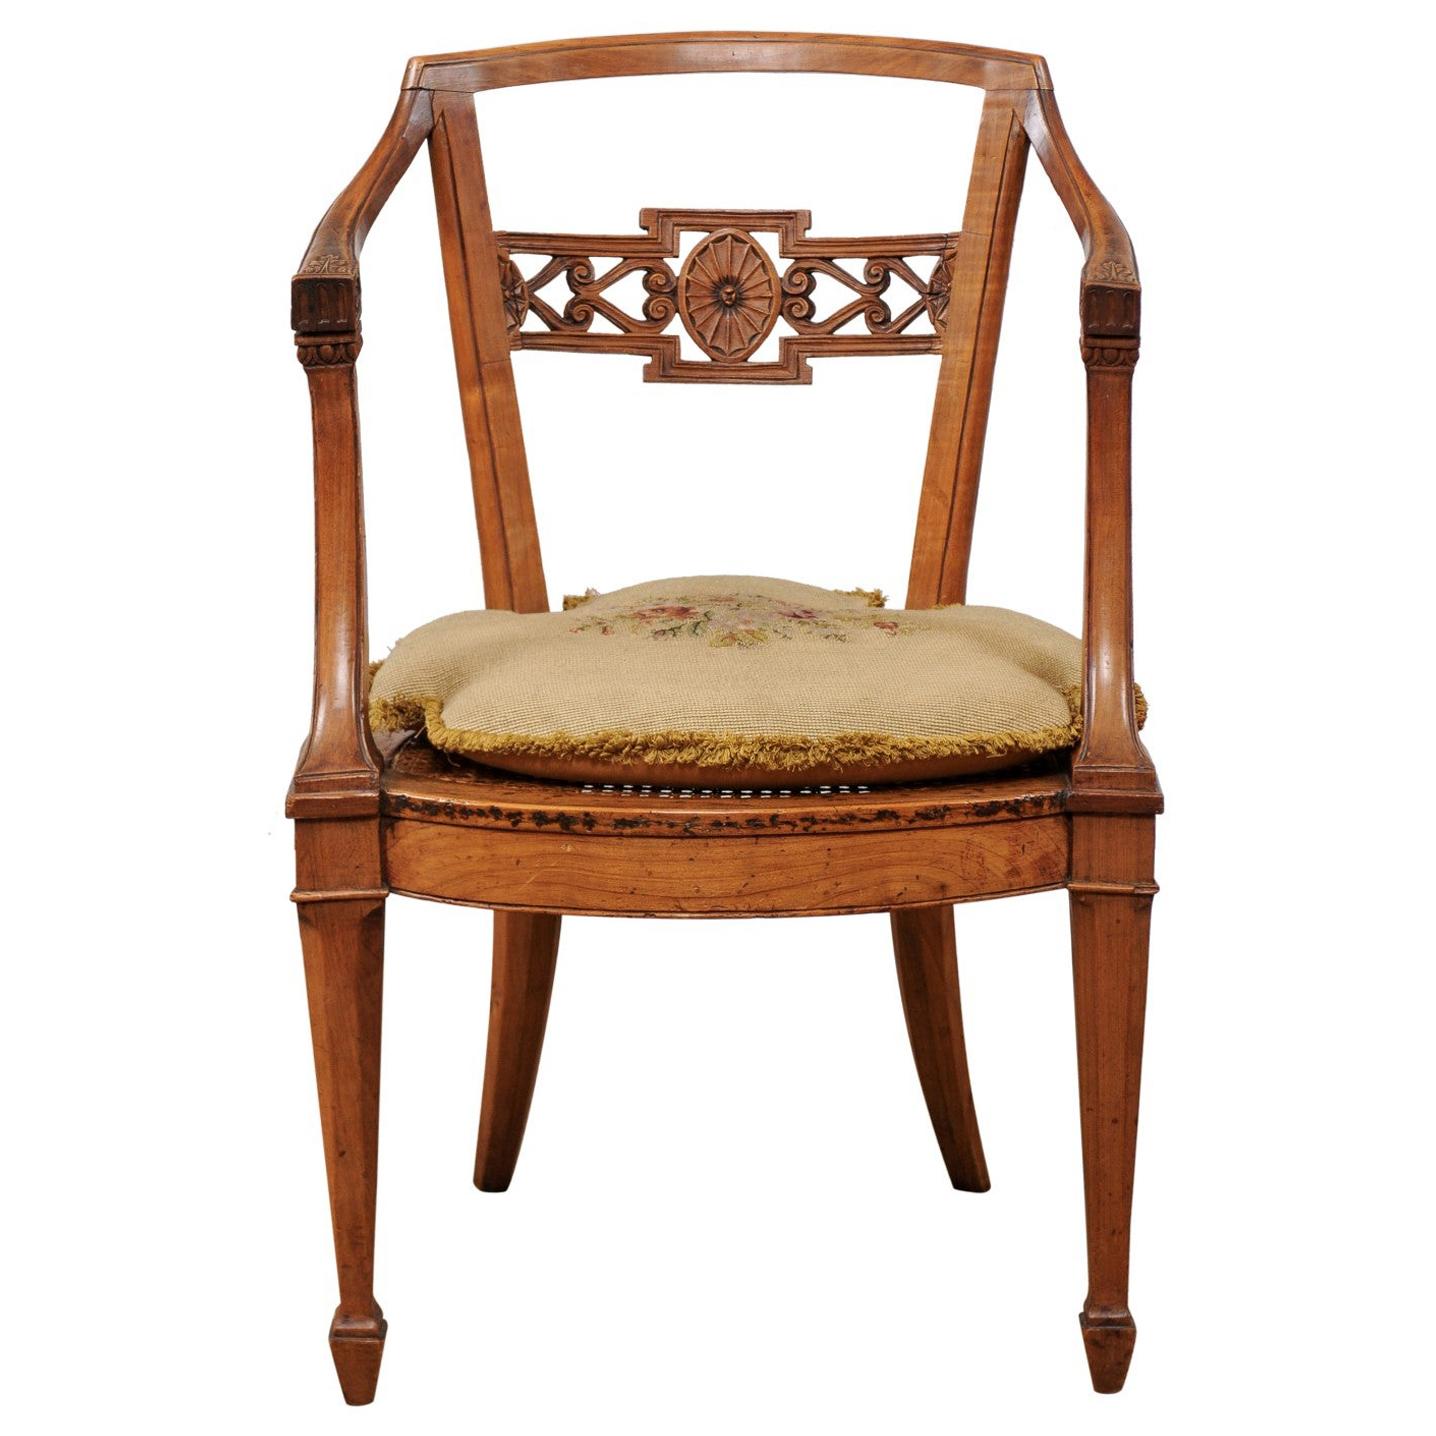 18th Century Italian Neoclassical Arm Chair in Fruitwood with Cane Seat